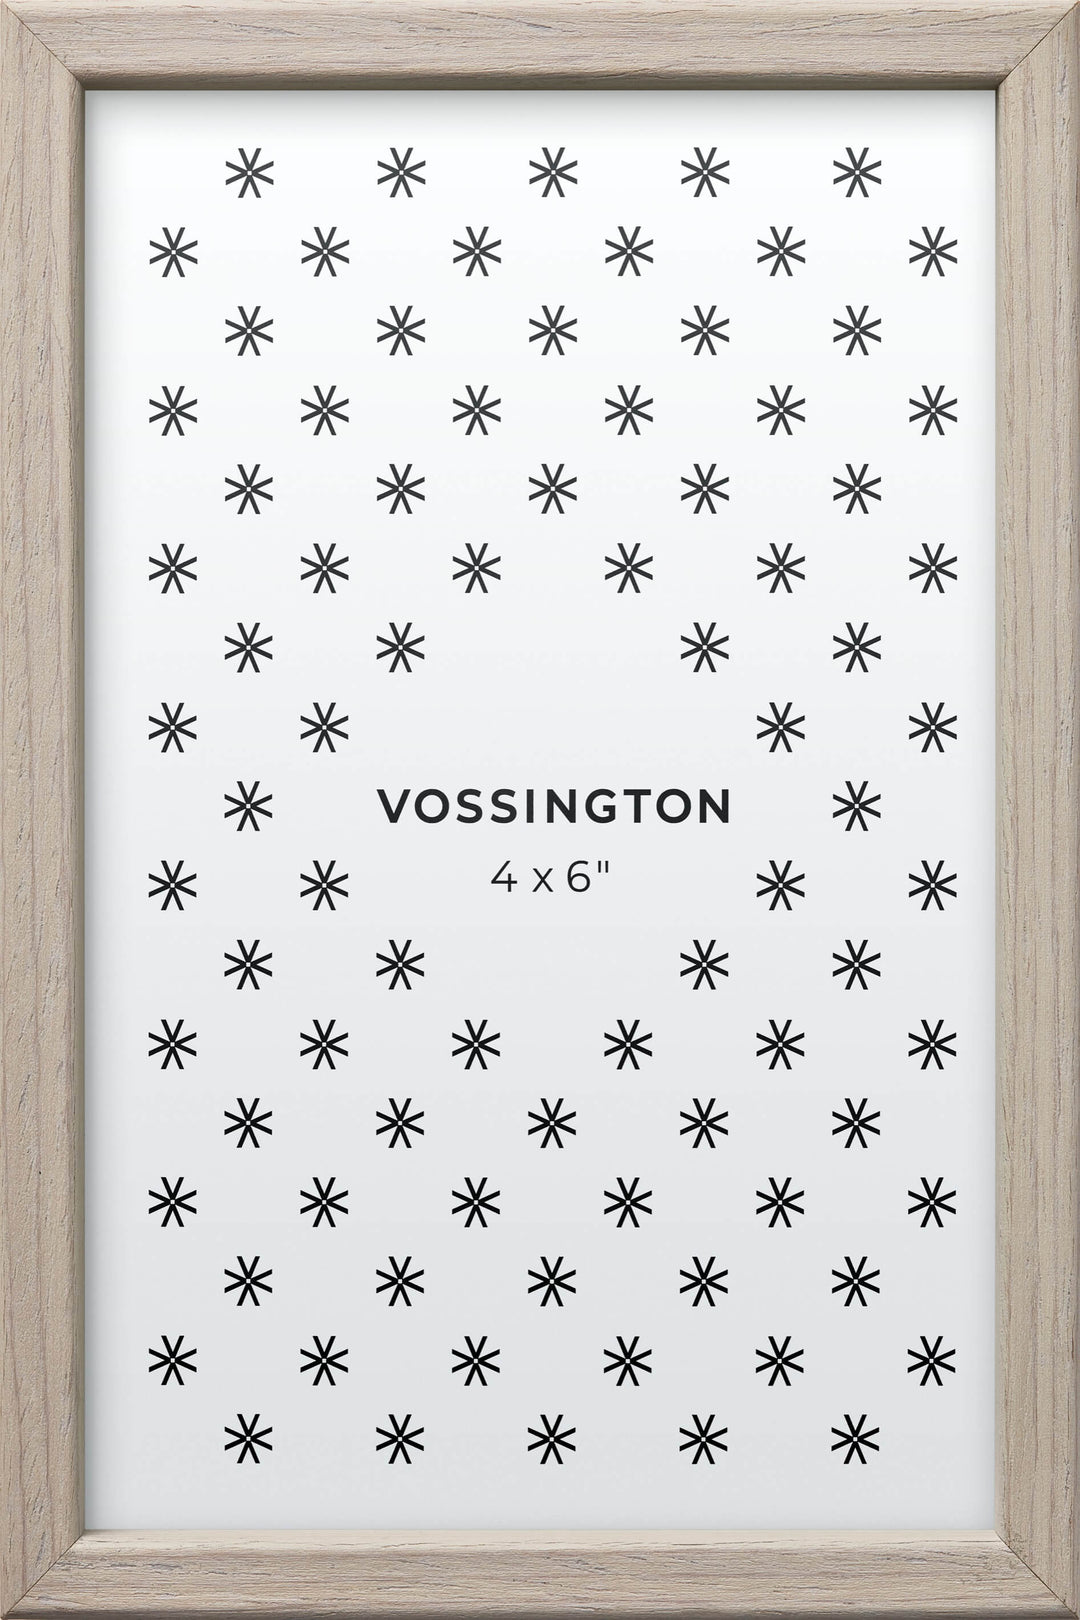 4x6 Frame - Exclusive White Wood Photo Frame From Vossington